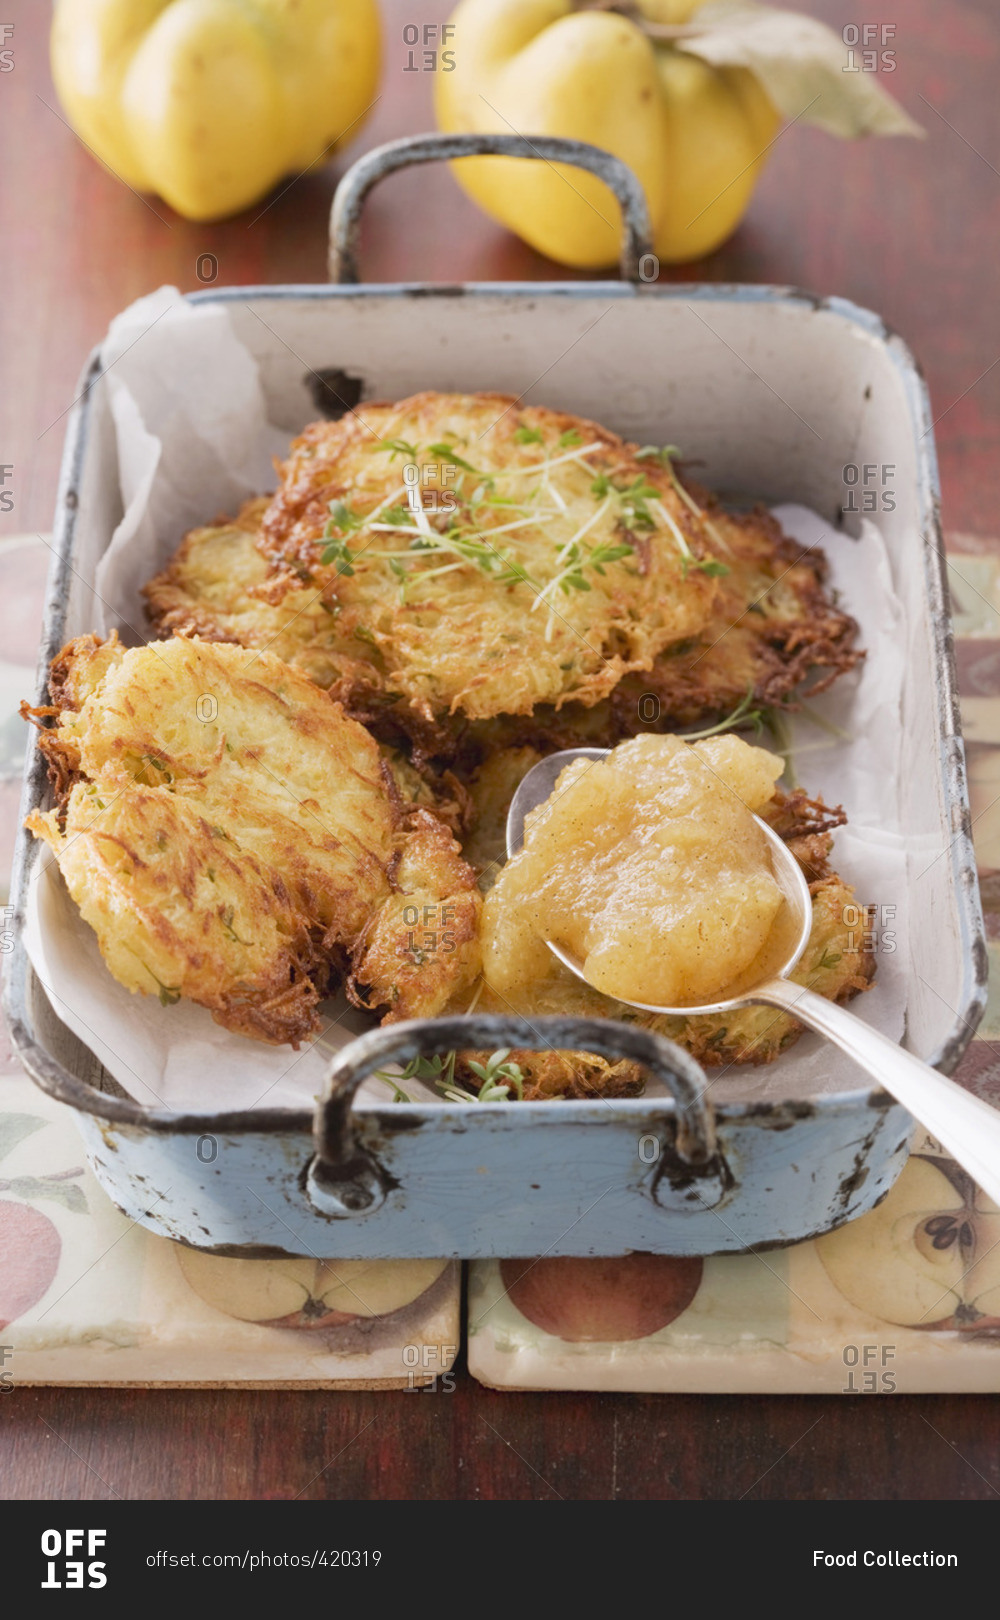 Turnip and potato cakes with quince sauce